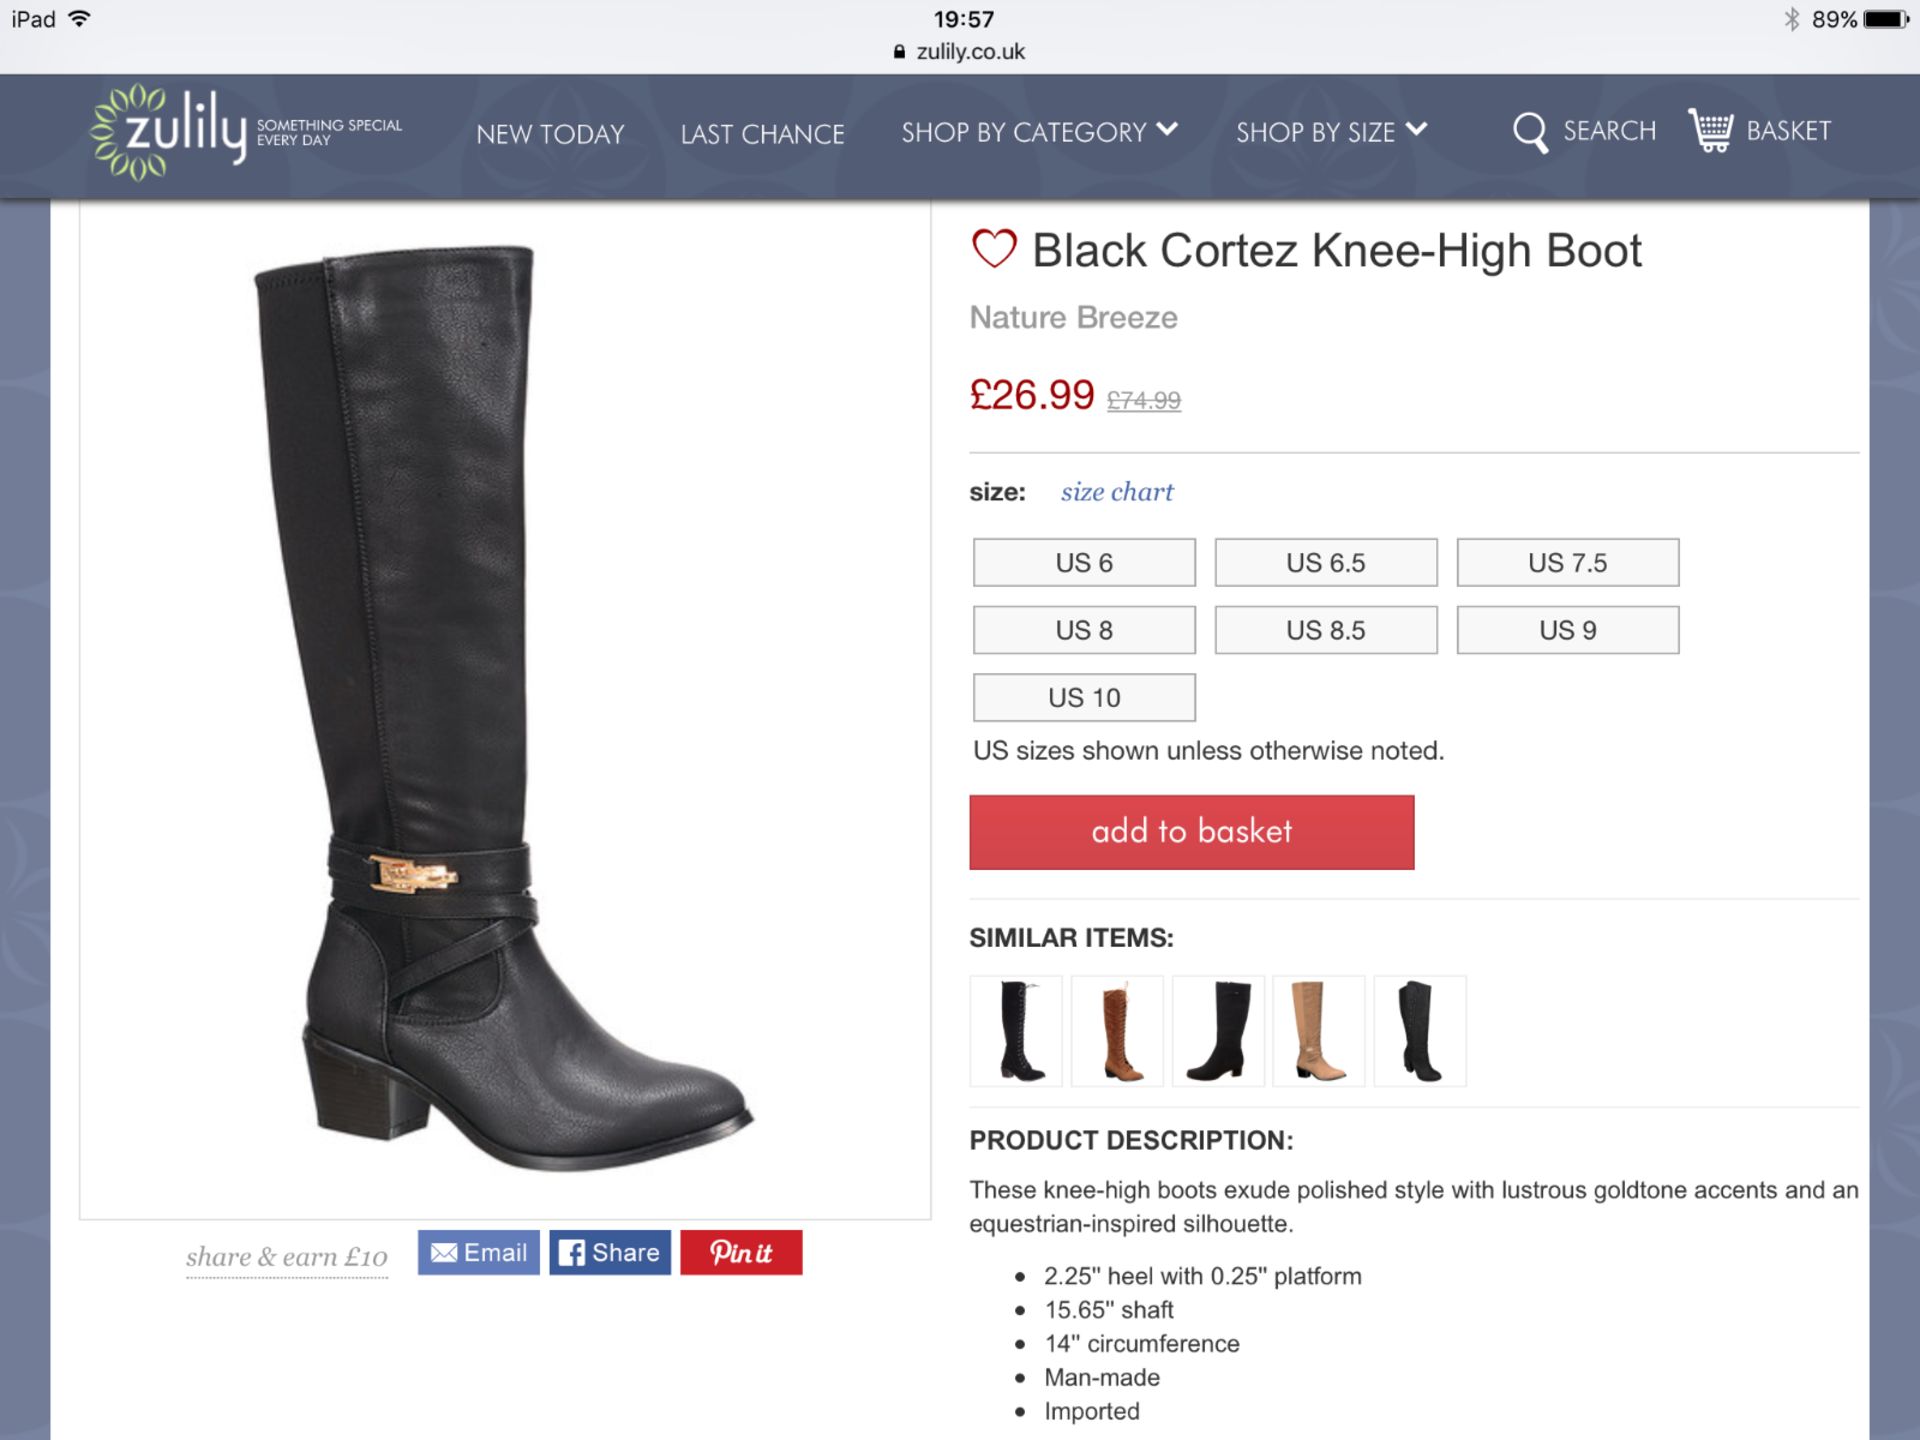 Nature Breeze Black Cortez Knee-High Boot, Size Eur 37.5, RRP £74.99 (New with box) [Ref: - Image 2 of 3